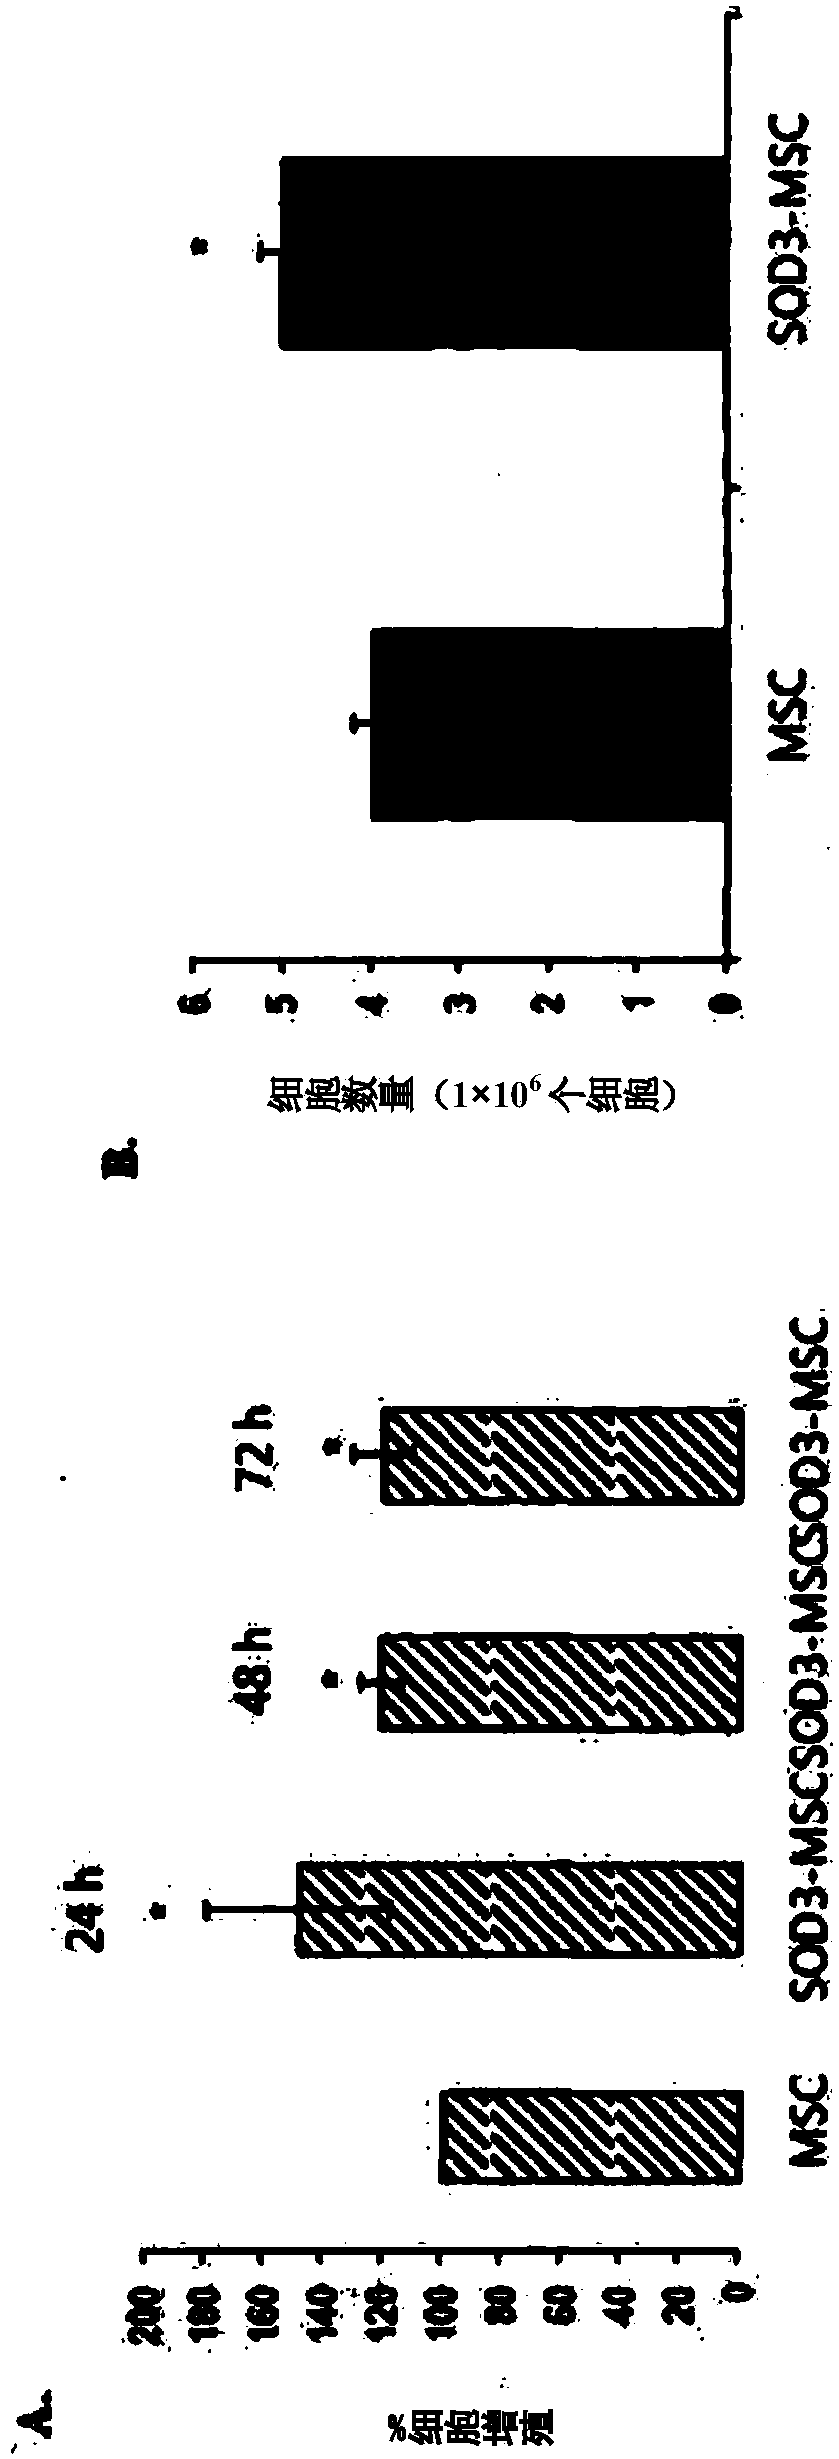 Composition for preventing or treating inflammatory diseases, containing, as active ingredient, stem cells overexpressing sod3